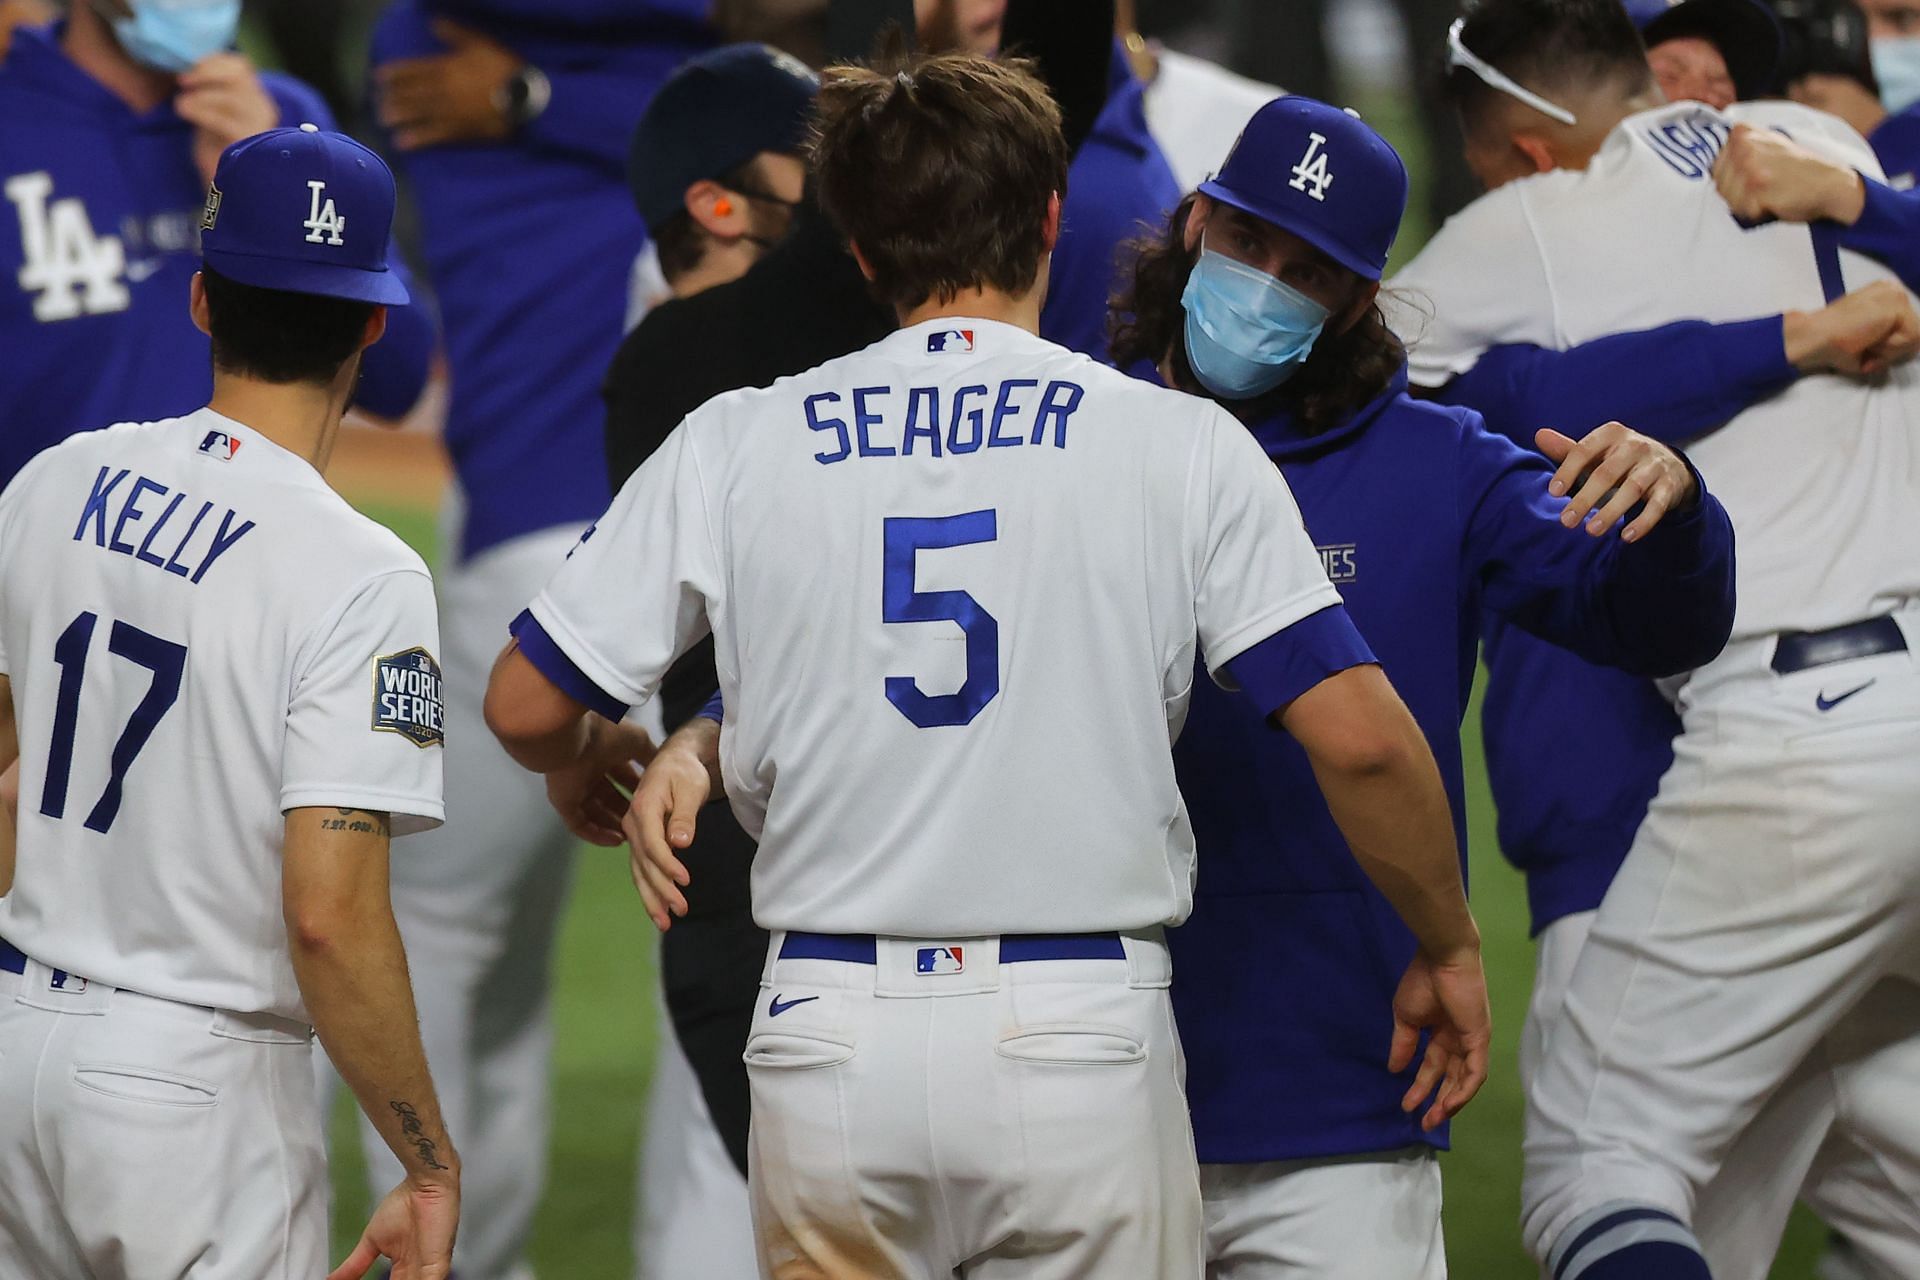 Corey Seager was the 2020 World Series MVP for the Dodgers